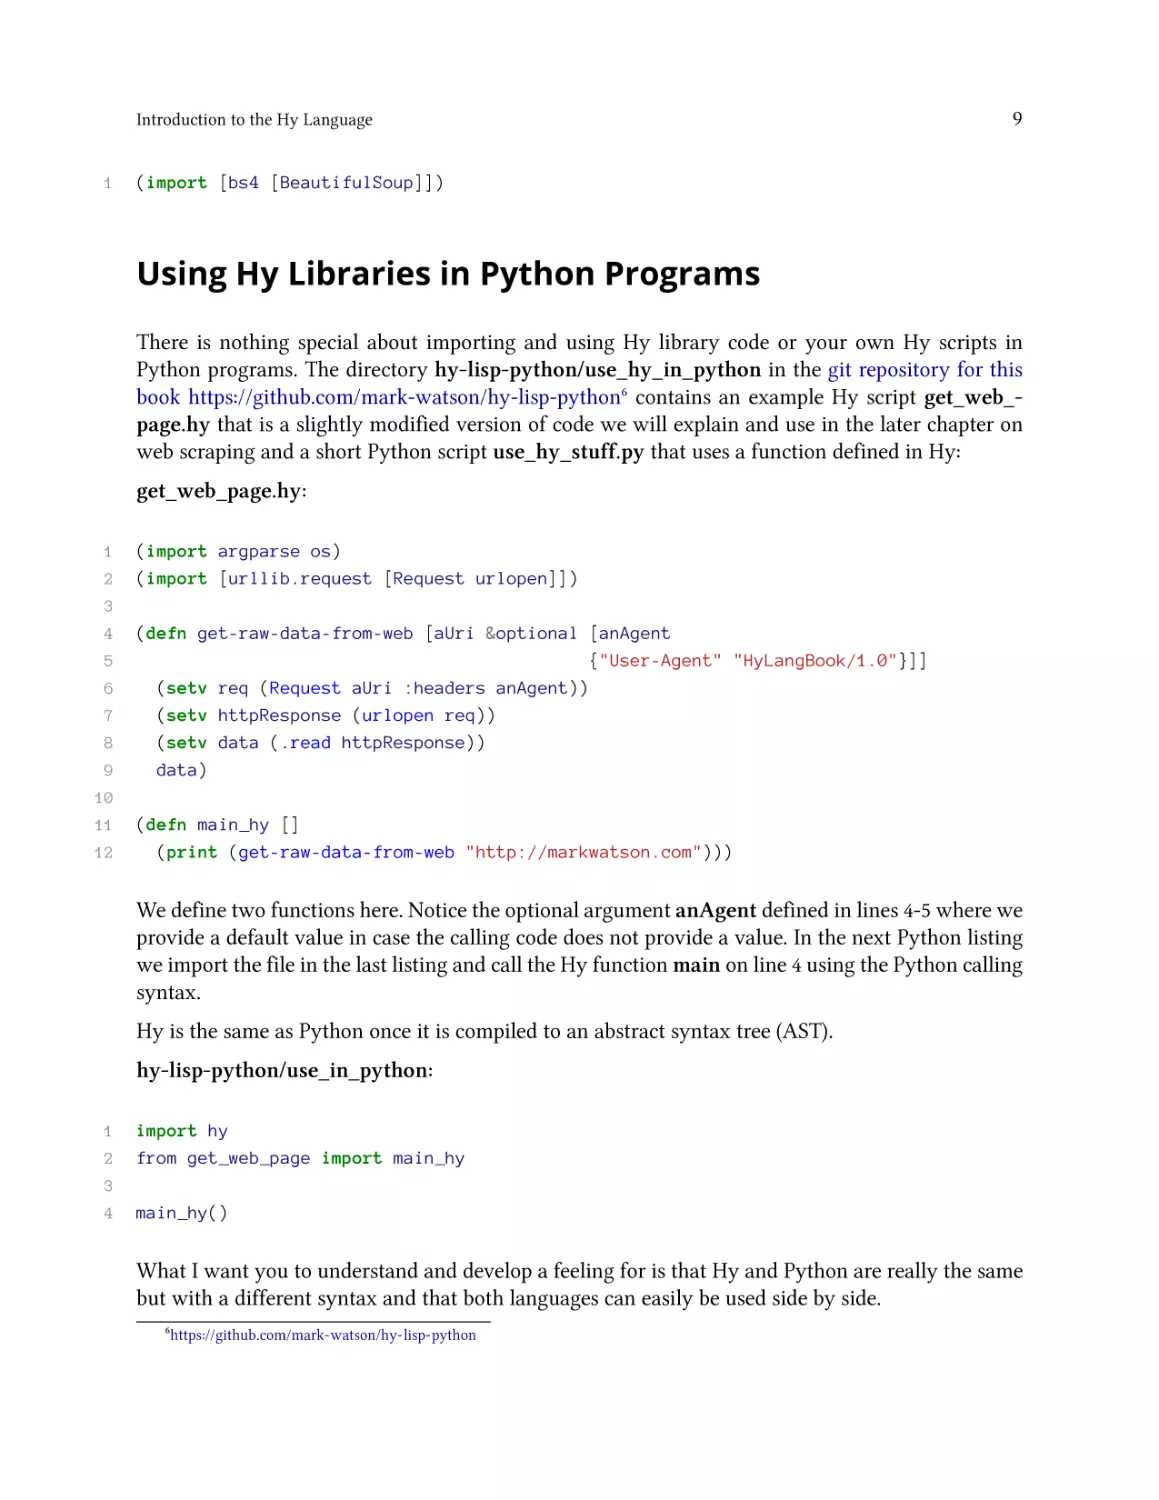 Using Hy Libraries in Python Programs